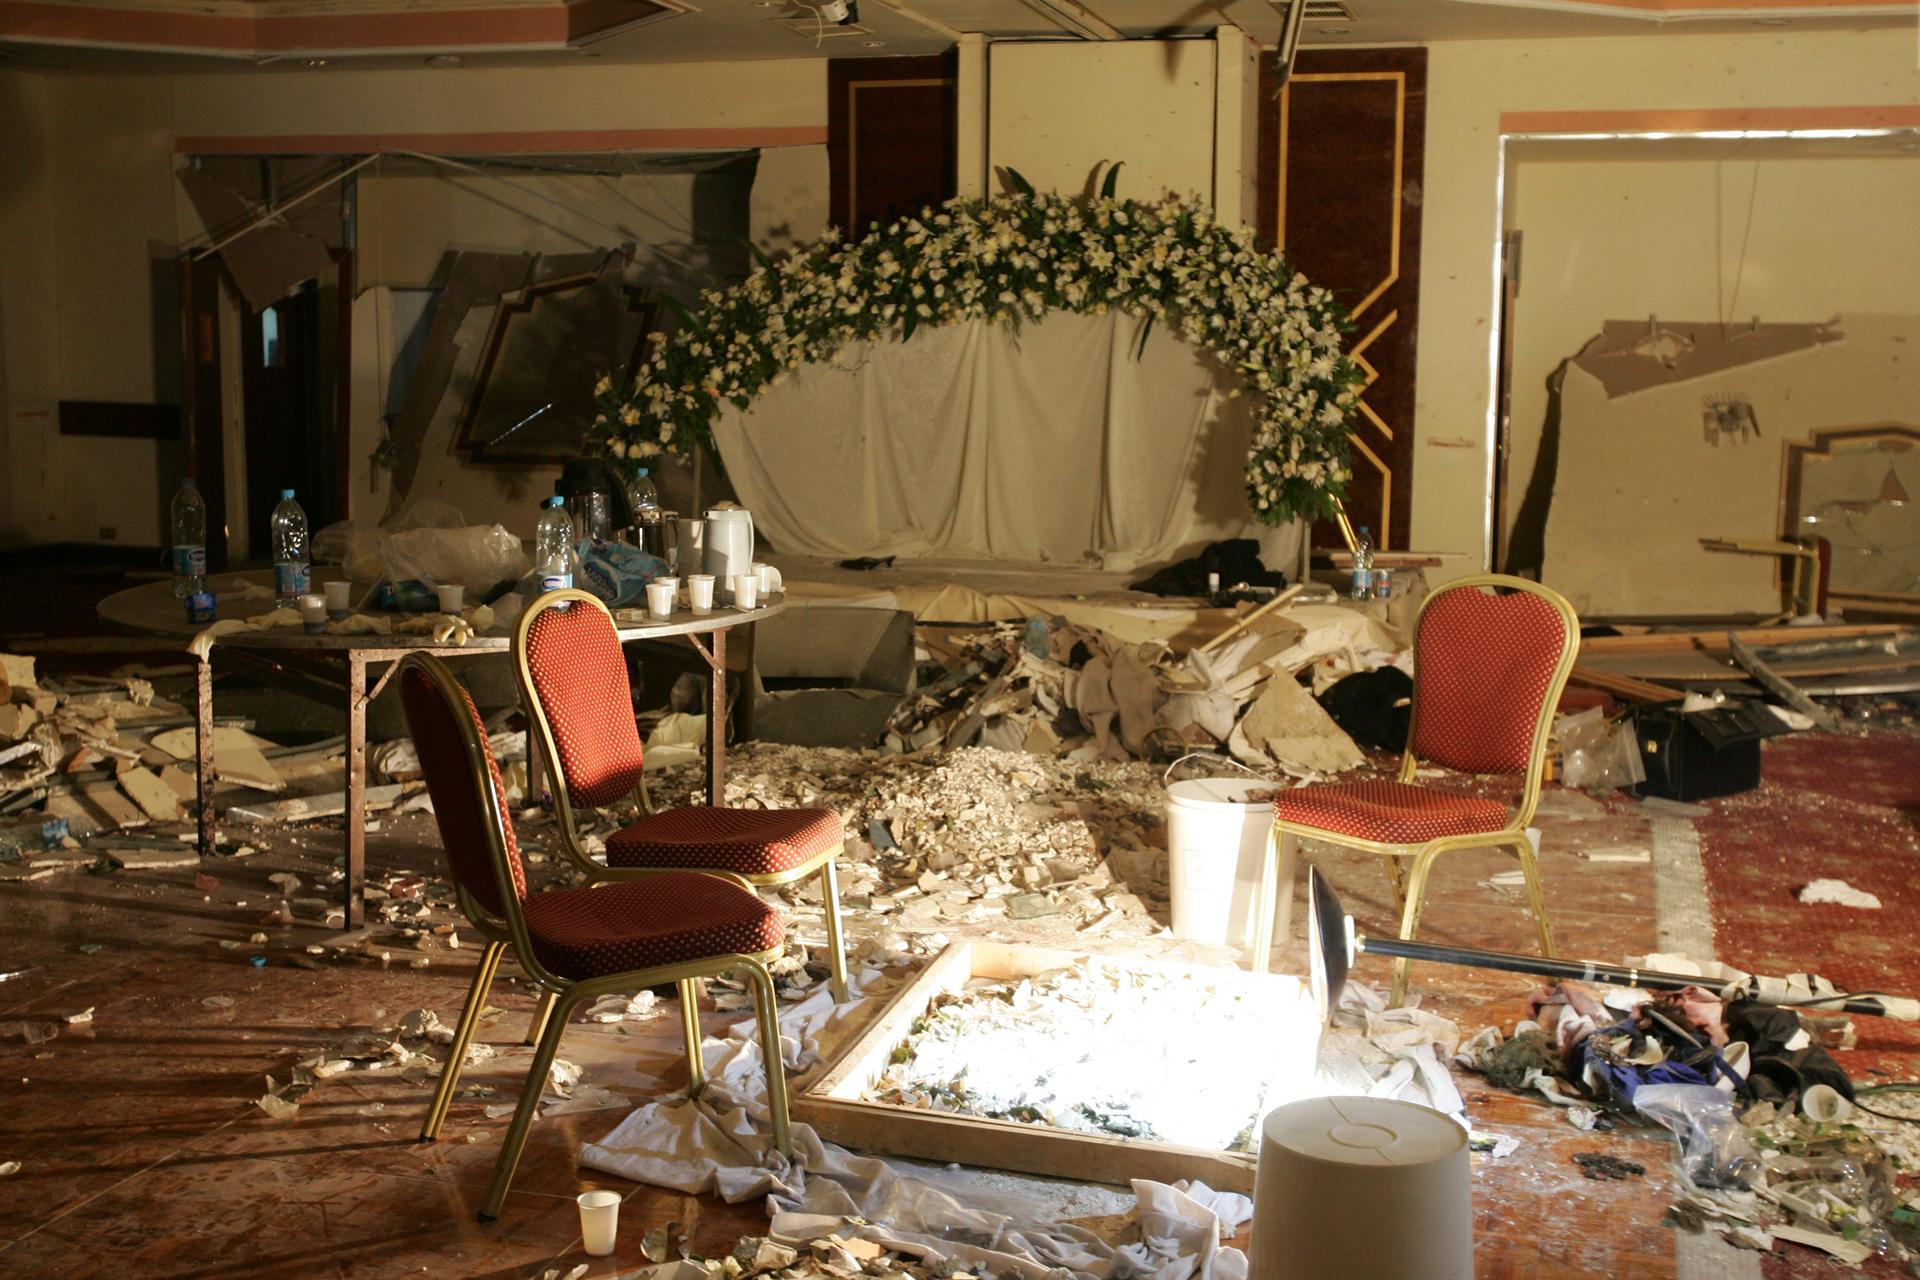 Debris lays strewn on the floor of a room being used by a wedding party following a bomb blast in the Radisson SAS hotel in Amman, November 10, 2005.